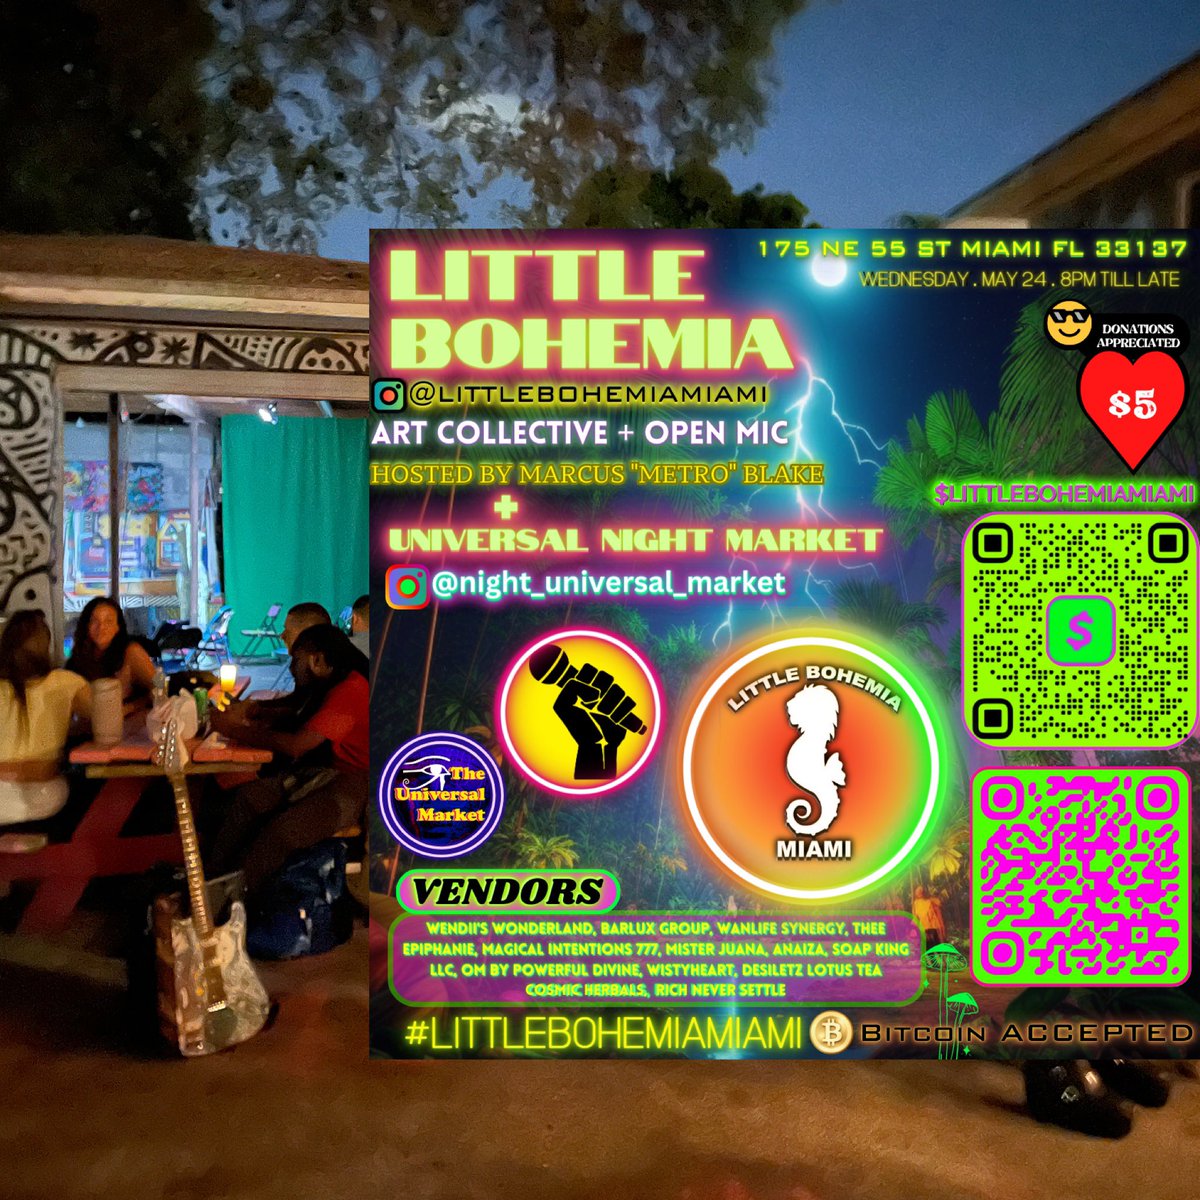 TONIGHT ⬇️ ✨ 👁 

>> 🫶 Wed- May 24th<<
 🧿 <<

- 8:30pm - 2 am -
.
Little Bohemia Open Mic 🎸🎤
@littlebohemiamiami ⚡️👽
175 NE 55 St Miami FL 33137

Hosted by:  @mdotblake 🕊🌙 

Join us for a night of creative expression in MUSIC, POETRY, & VISUAL ARTS. Support local vendors